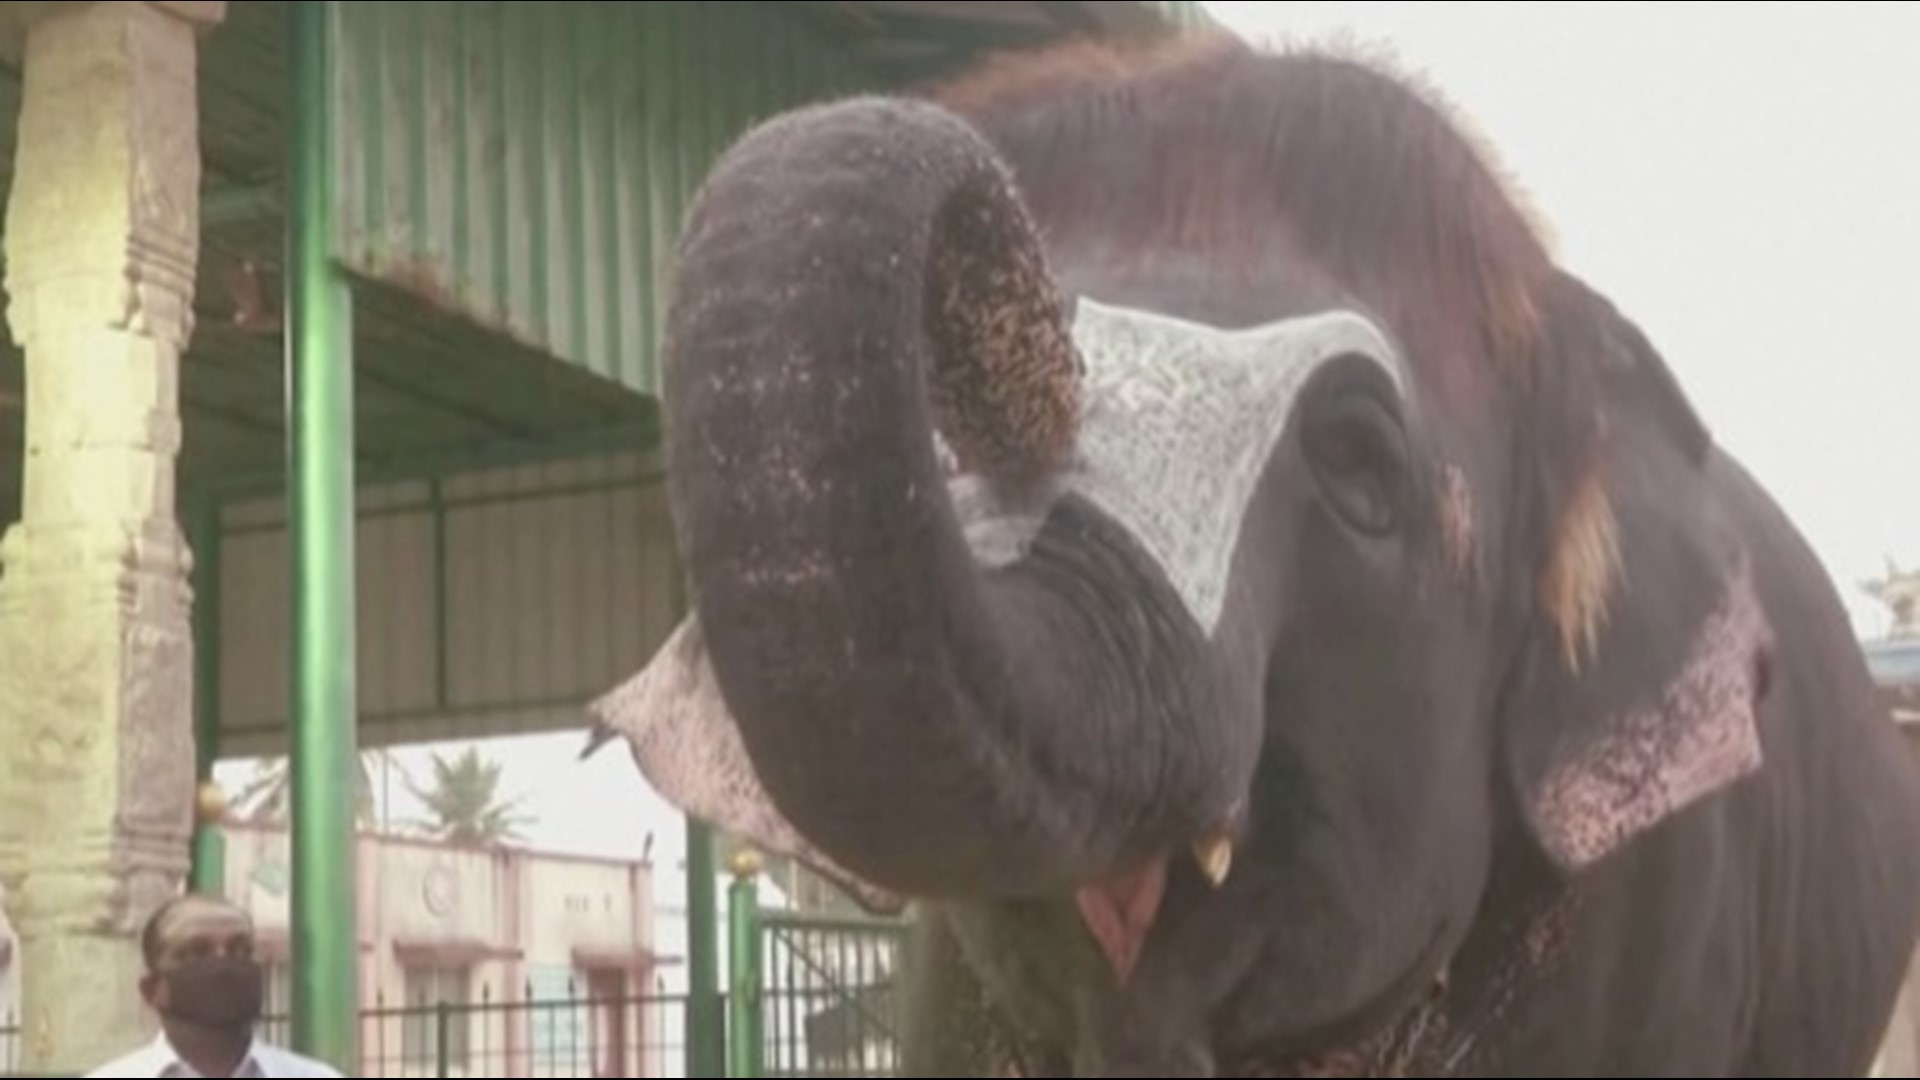 An elephant with an unusual hairstyle is certainly turning heads in India. Buzz60's Mercer Morrison has the story.